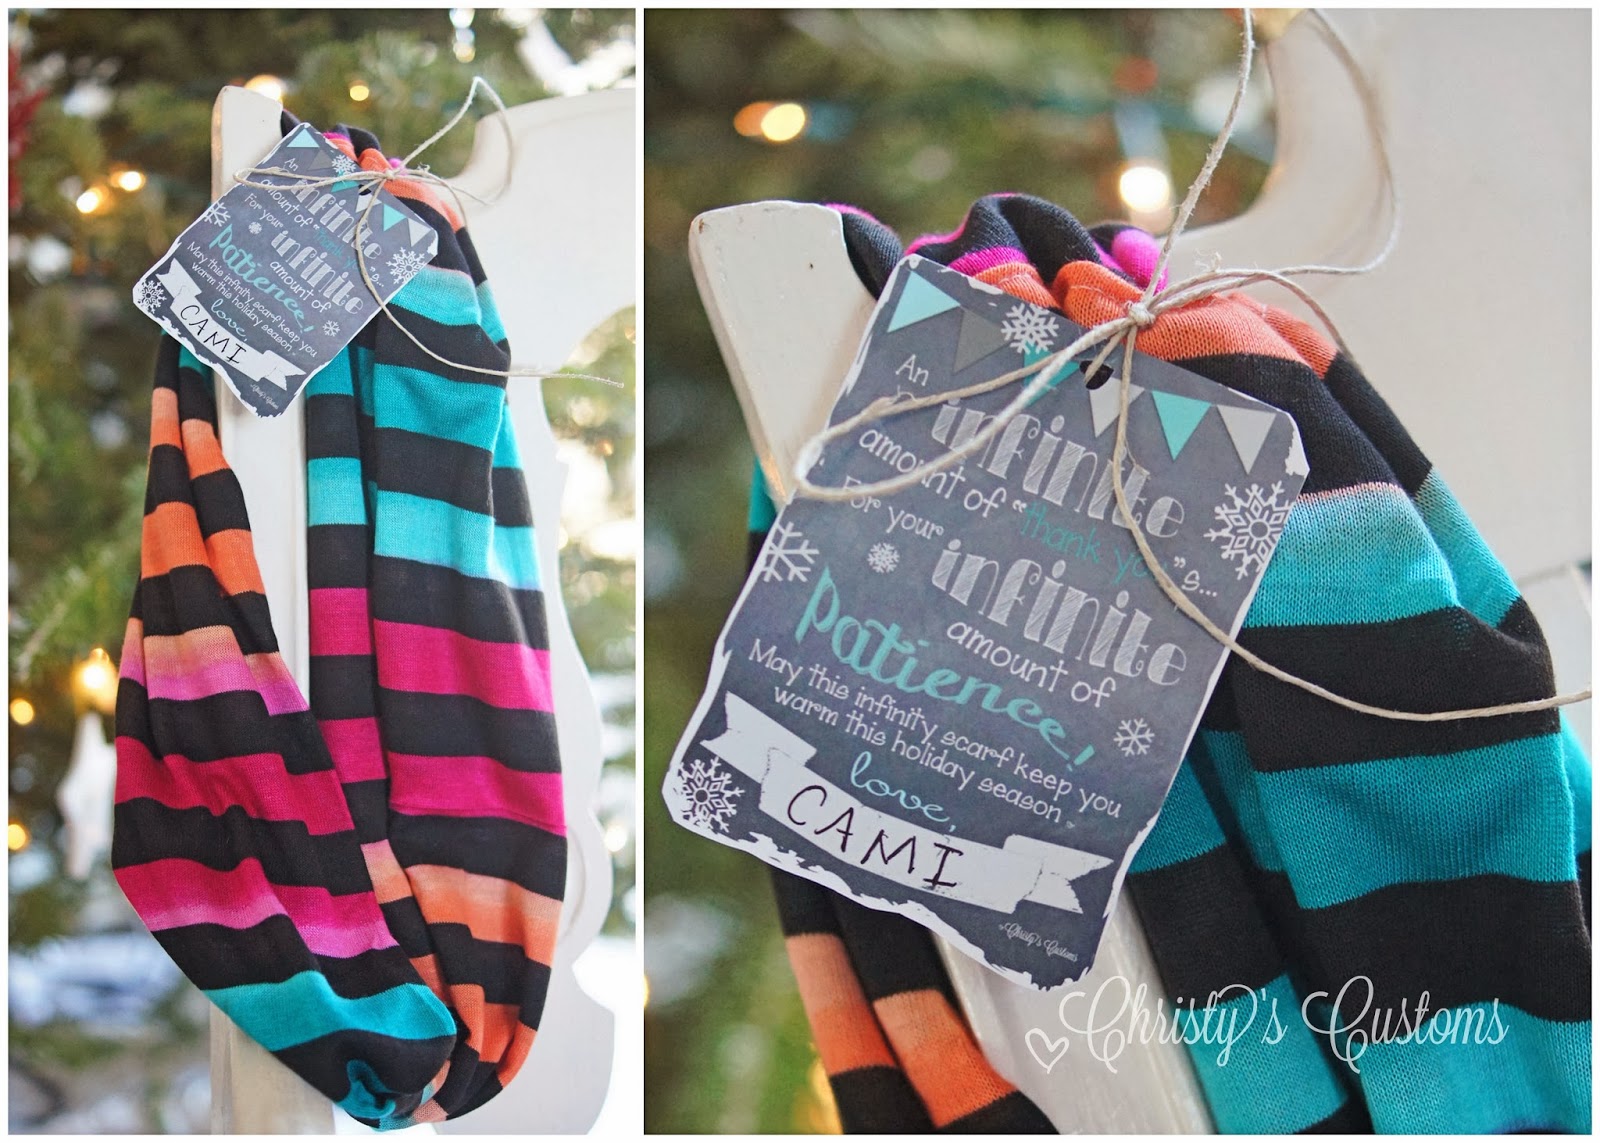 Christy's Customs and the Little House by the Olive Tree: A great teacher gift {A ...